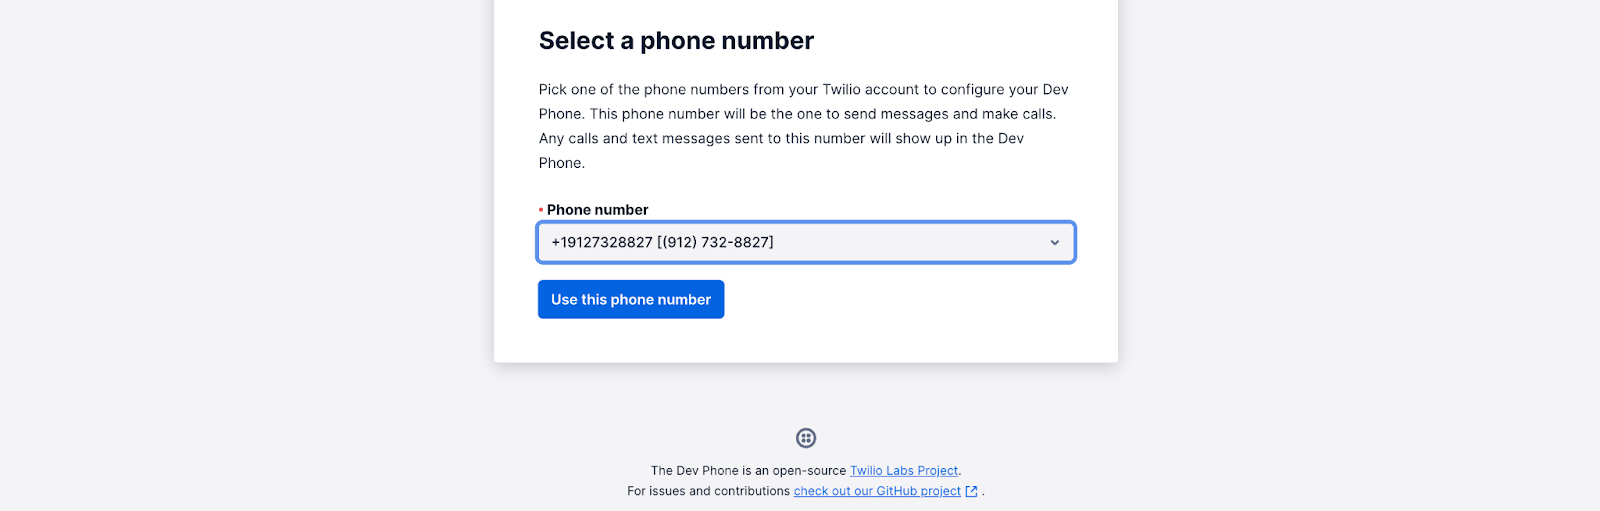 Select a phone number to associate with the Dev Phone